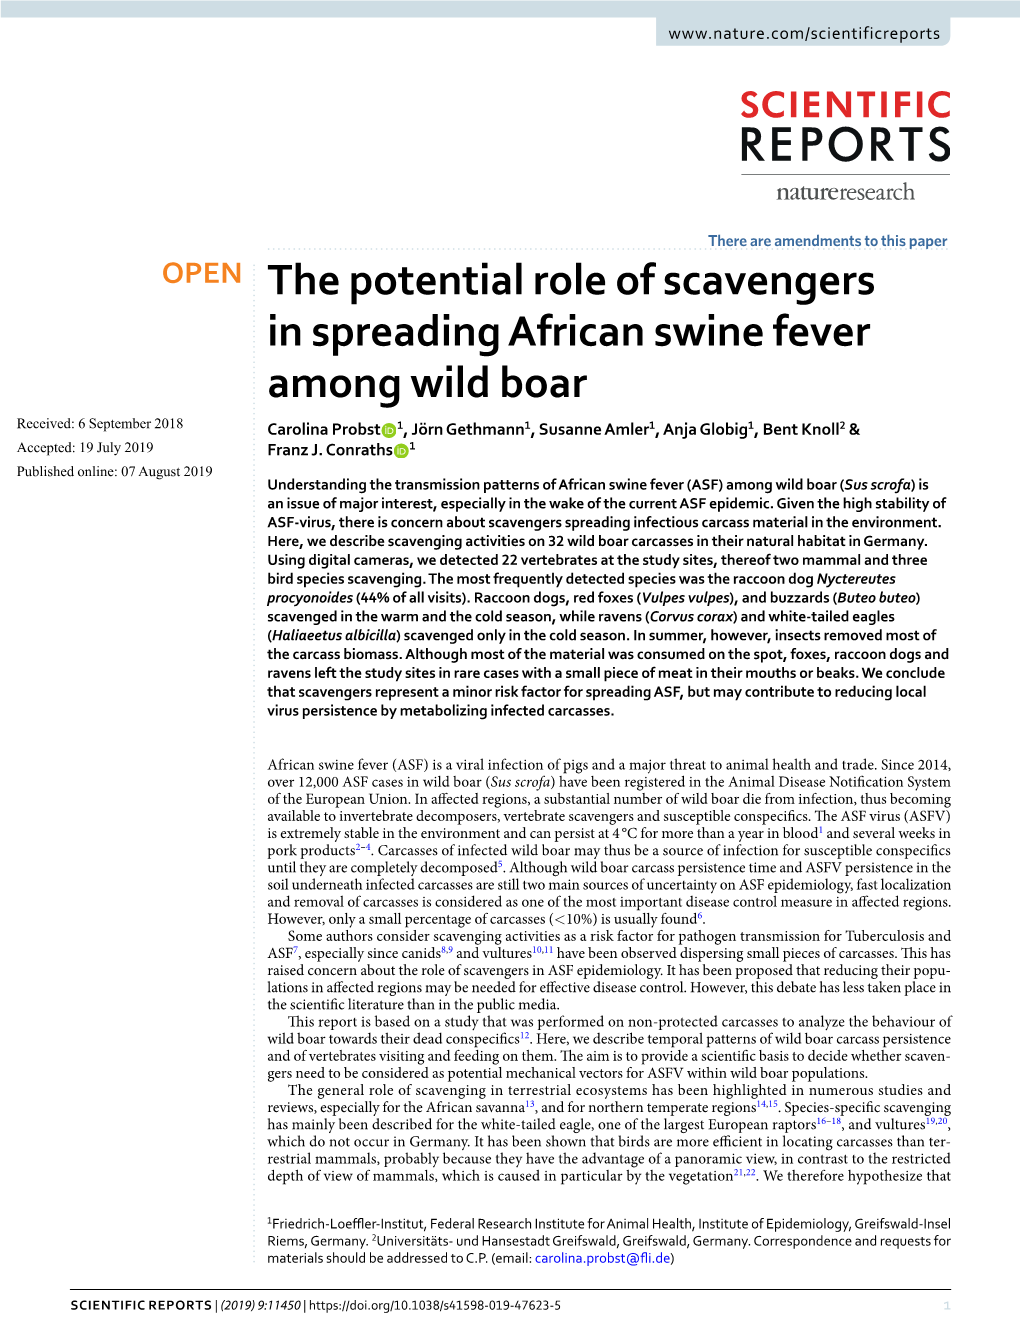 The Potential Role of Scavengers in Spreading African Swine Fever